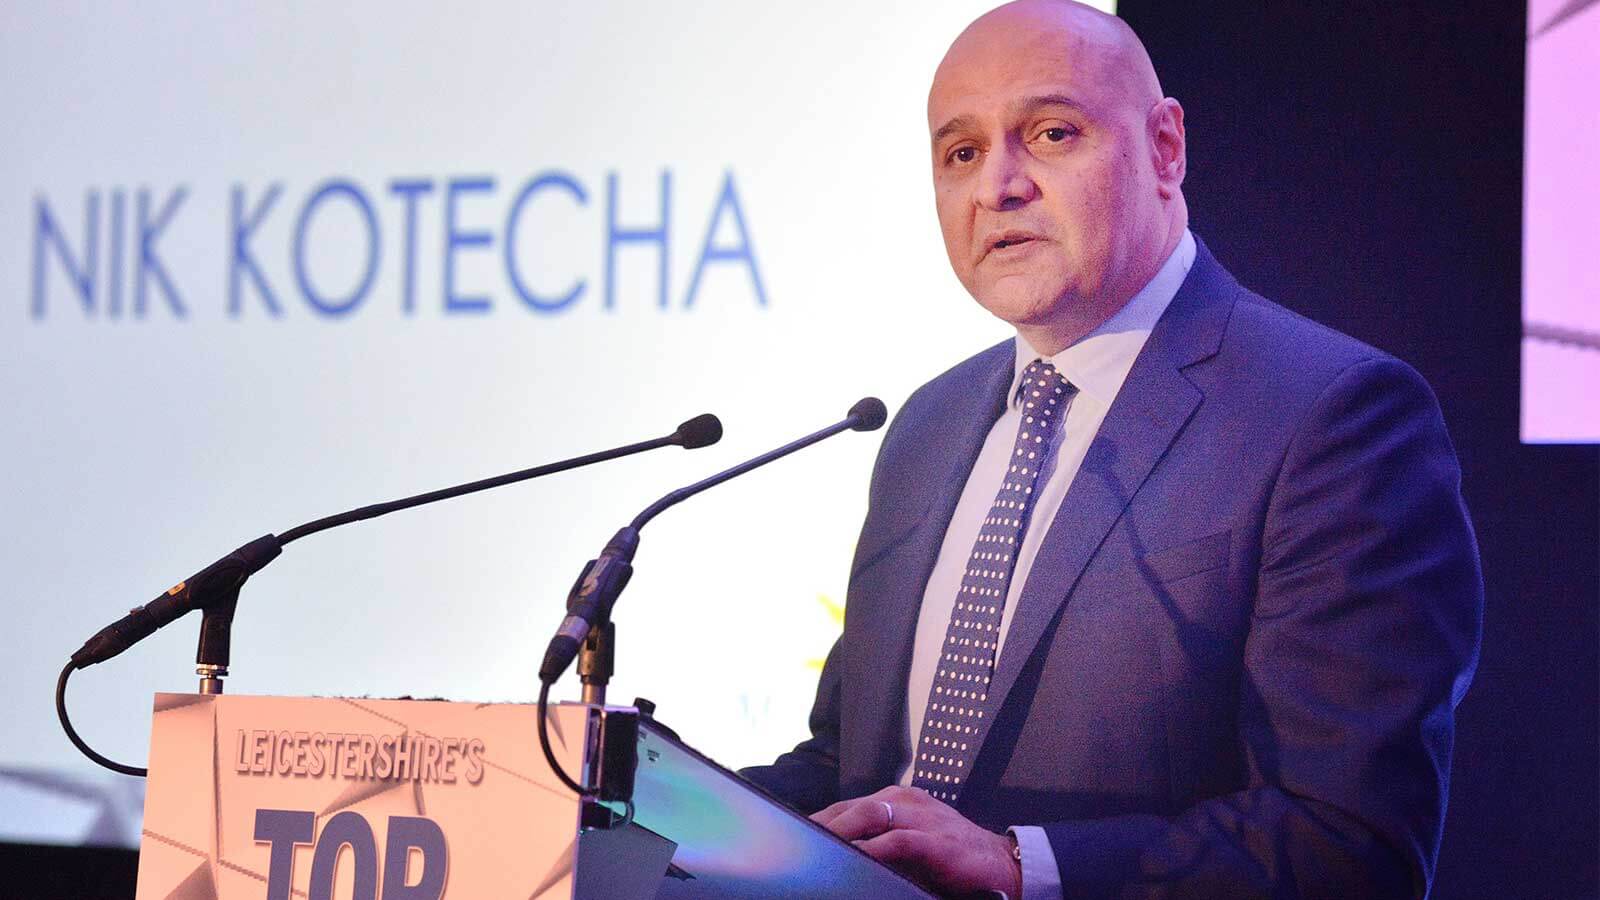 Dr Nik Kotecha OBE, Chief Executive of Morningside Pharmaceuticals, at the Top 200 Leicestershire Companies 2019